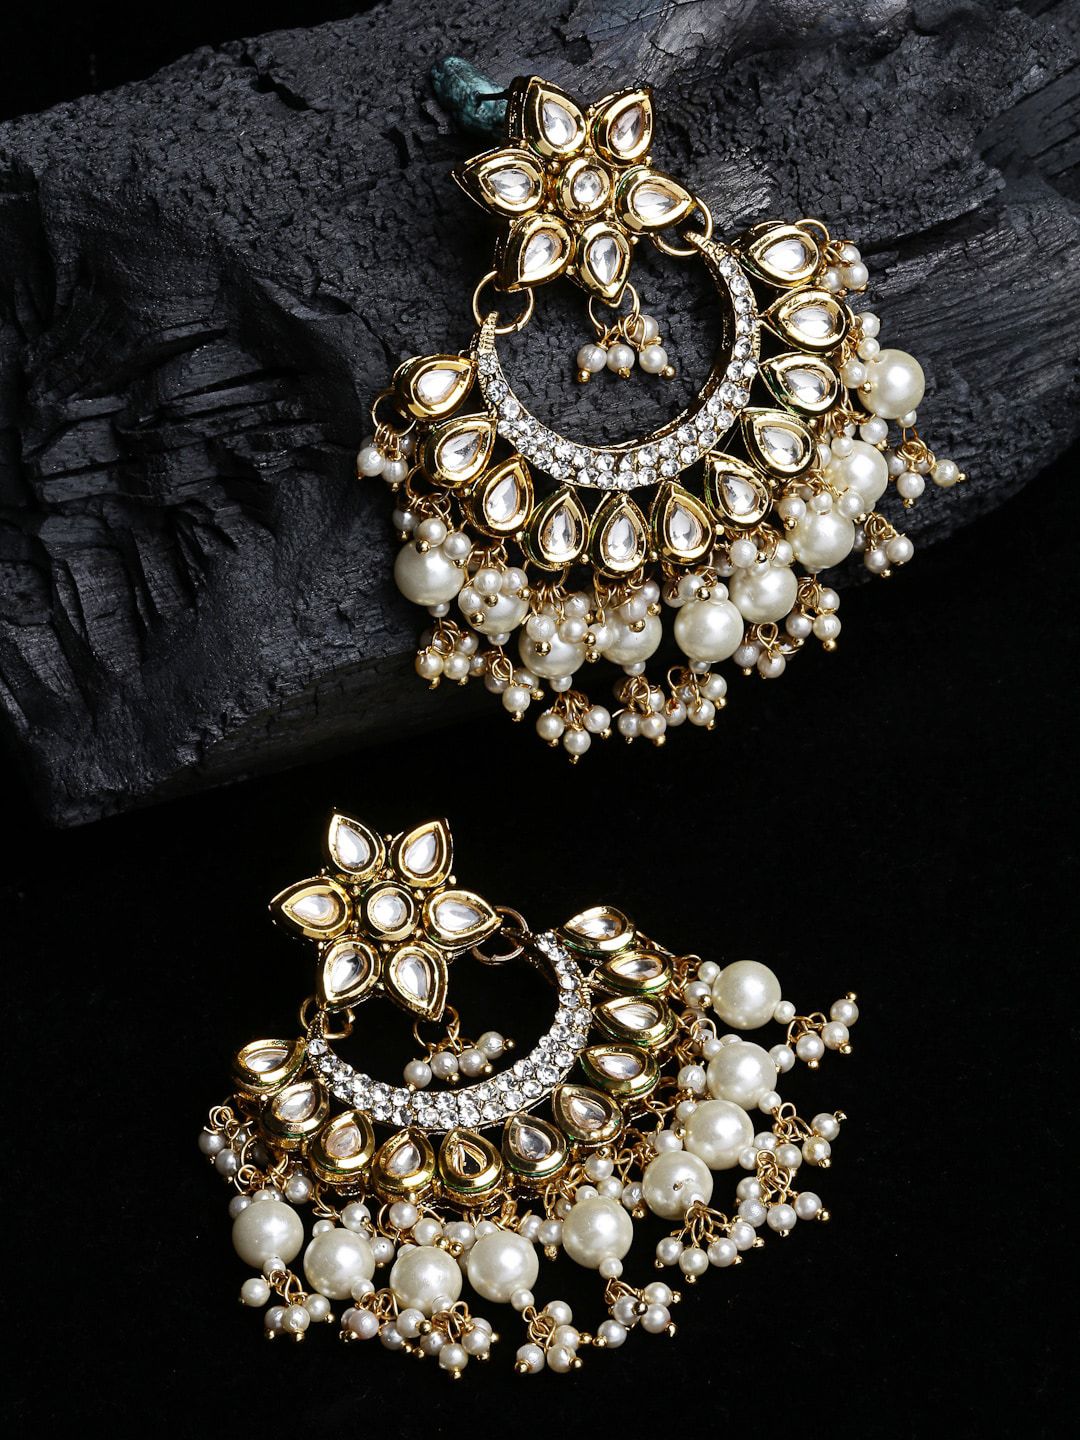 PANASH Gold-Toned Crescent Shaped Chandbalis Earrings Price in India